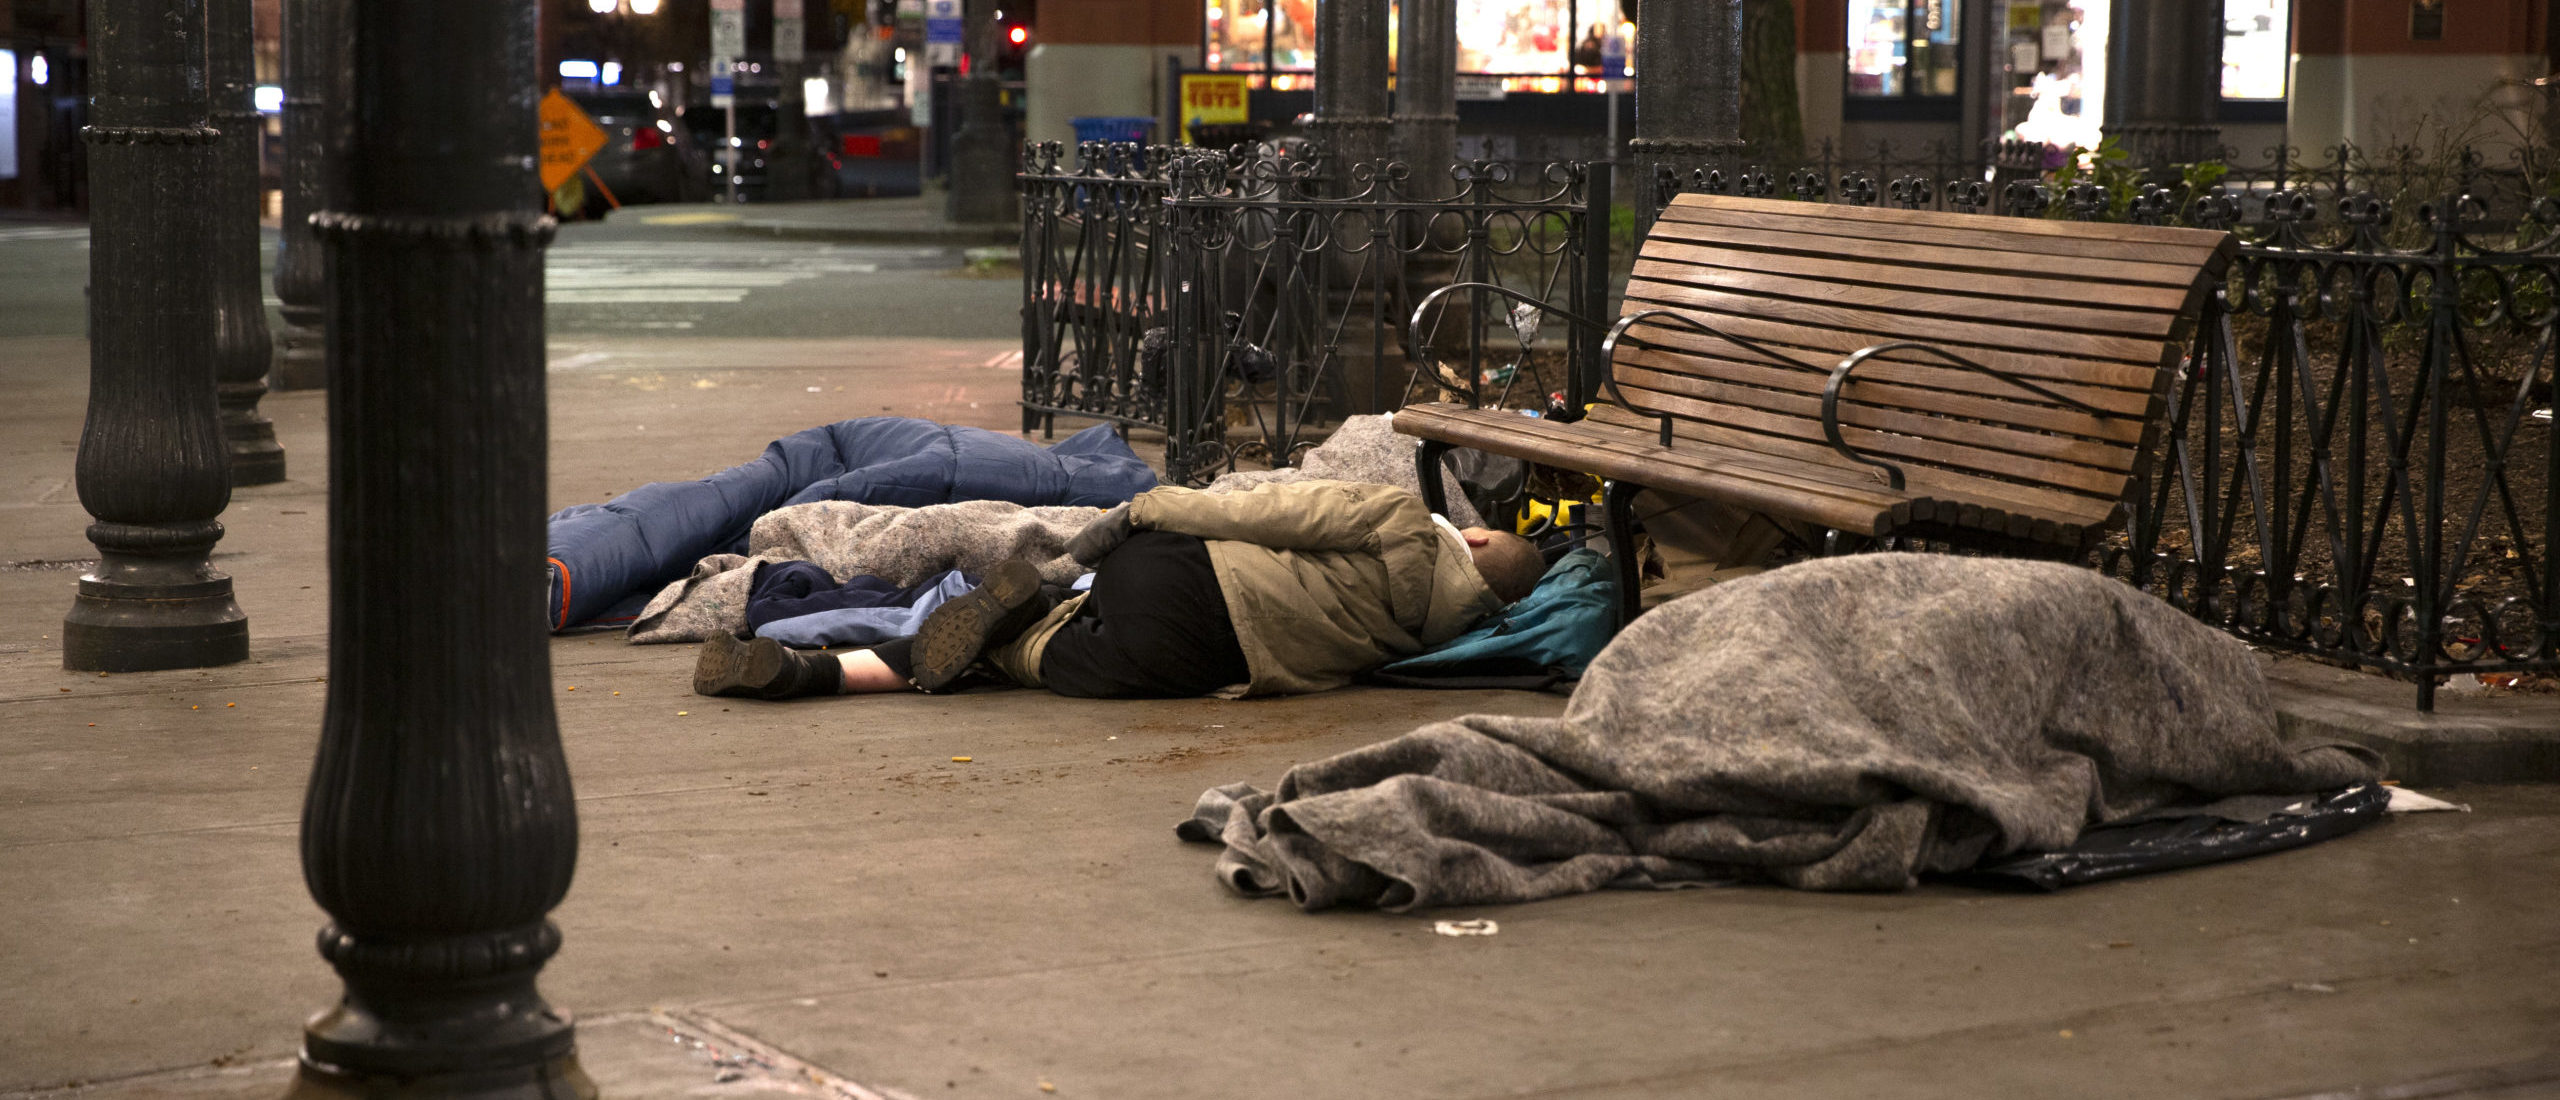 SEATTLE, WA - APRIL 06: People sleep outside on a sidewalk on April 6, 2020 in Seattle, Washington. (Photo by Karen Ducey/Getty Images)